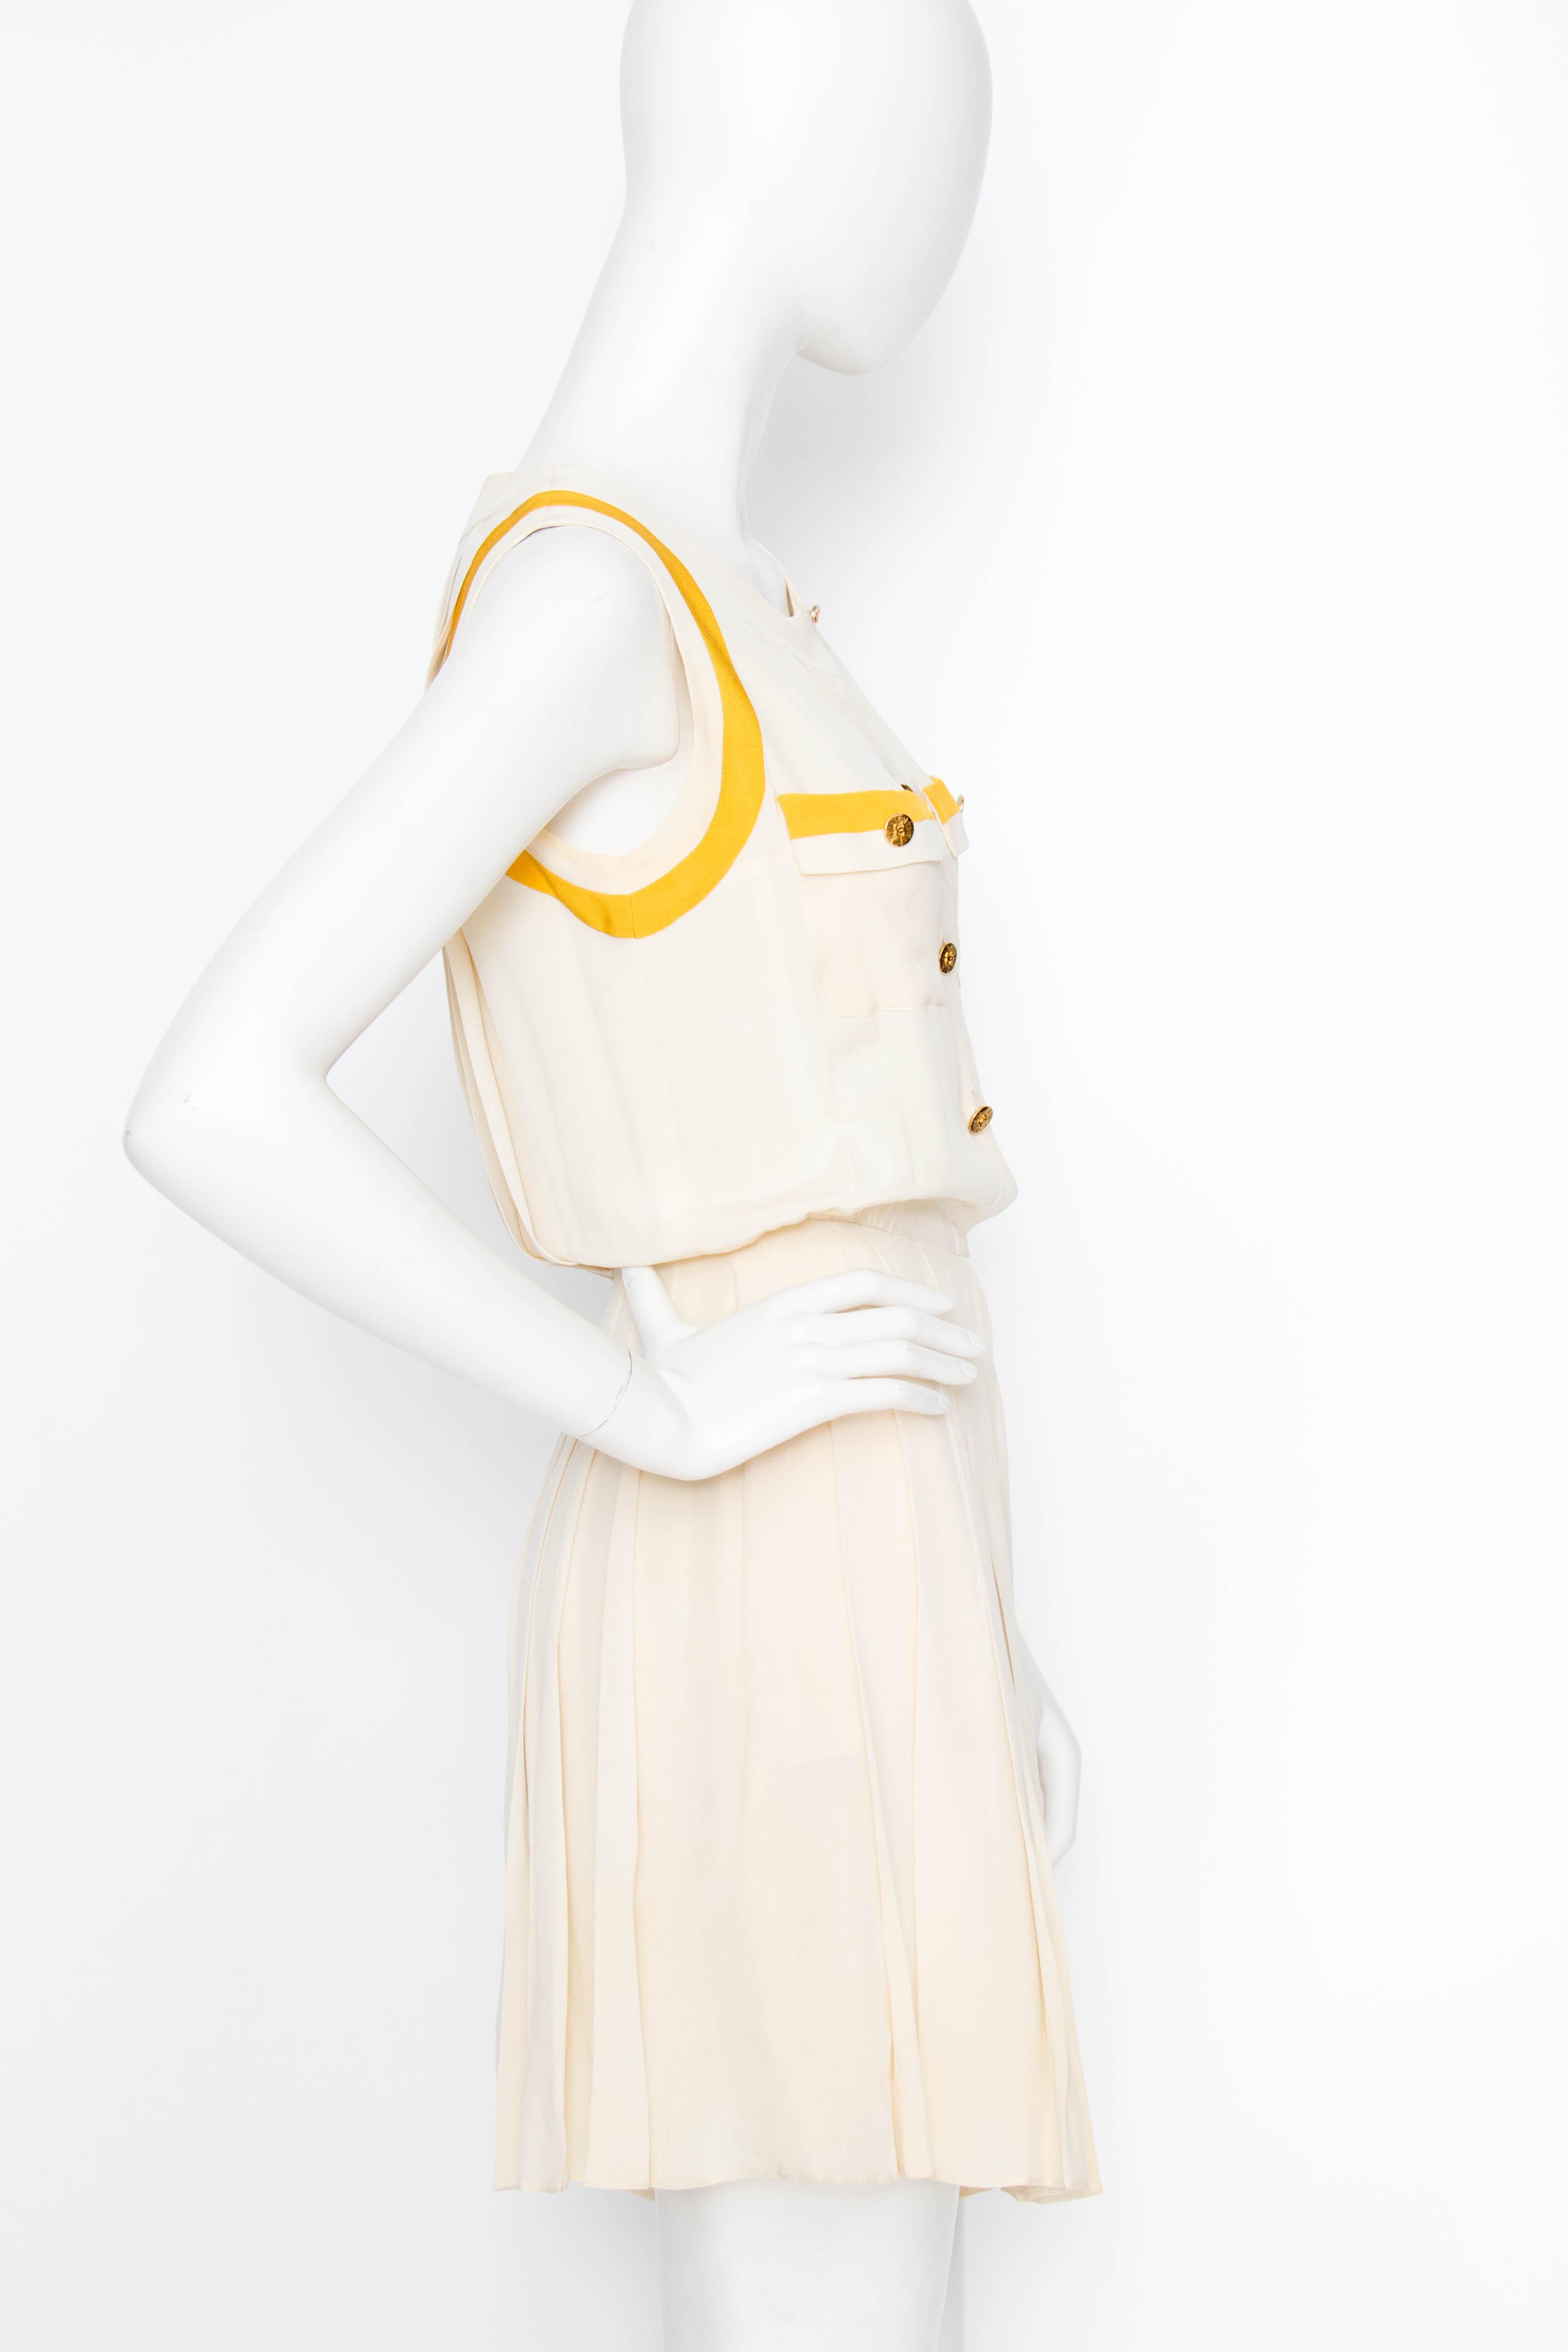 A 1980s Chanel creme silk playsuit with yellow piping and gorgeous pleat detail on the back and shorts. Gold-toned Chanel engraved buttons adorn the button down front and the breast pockets. The suit comes with a matching yellow bolero that can be